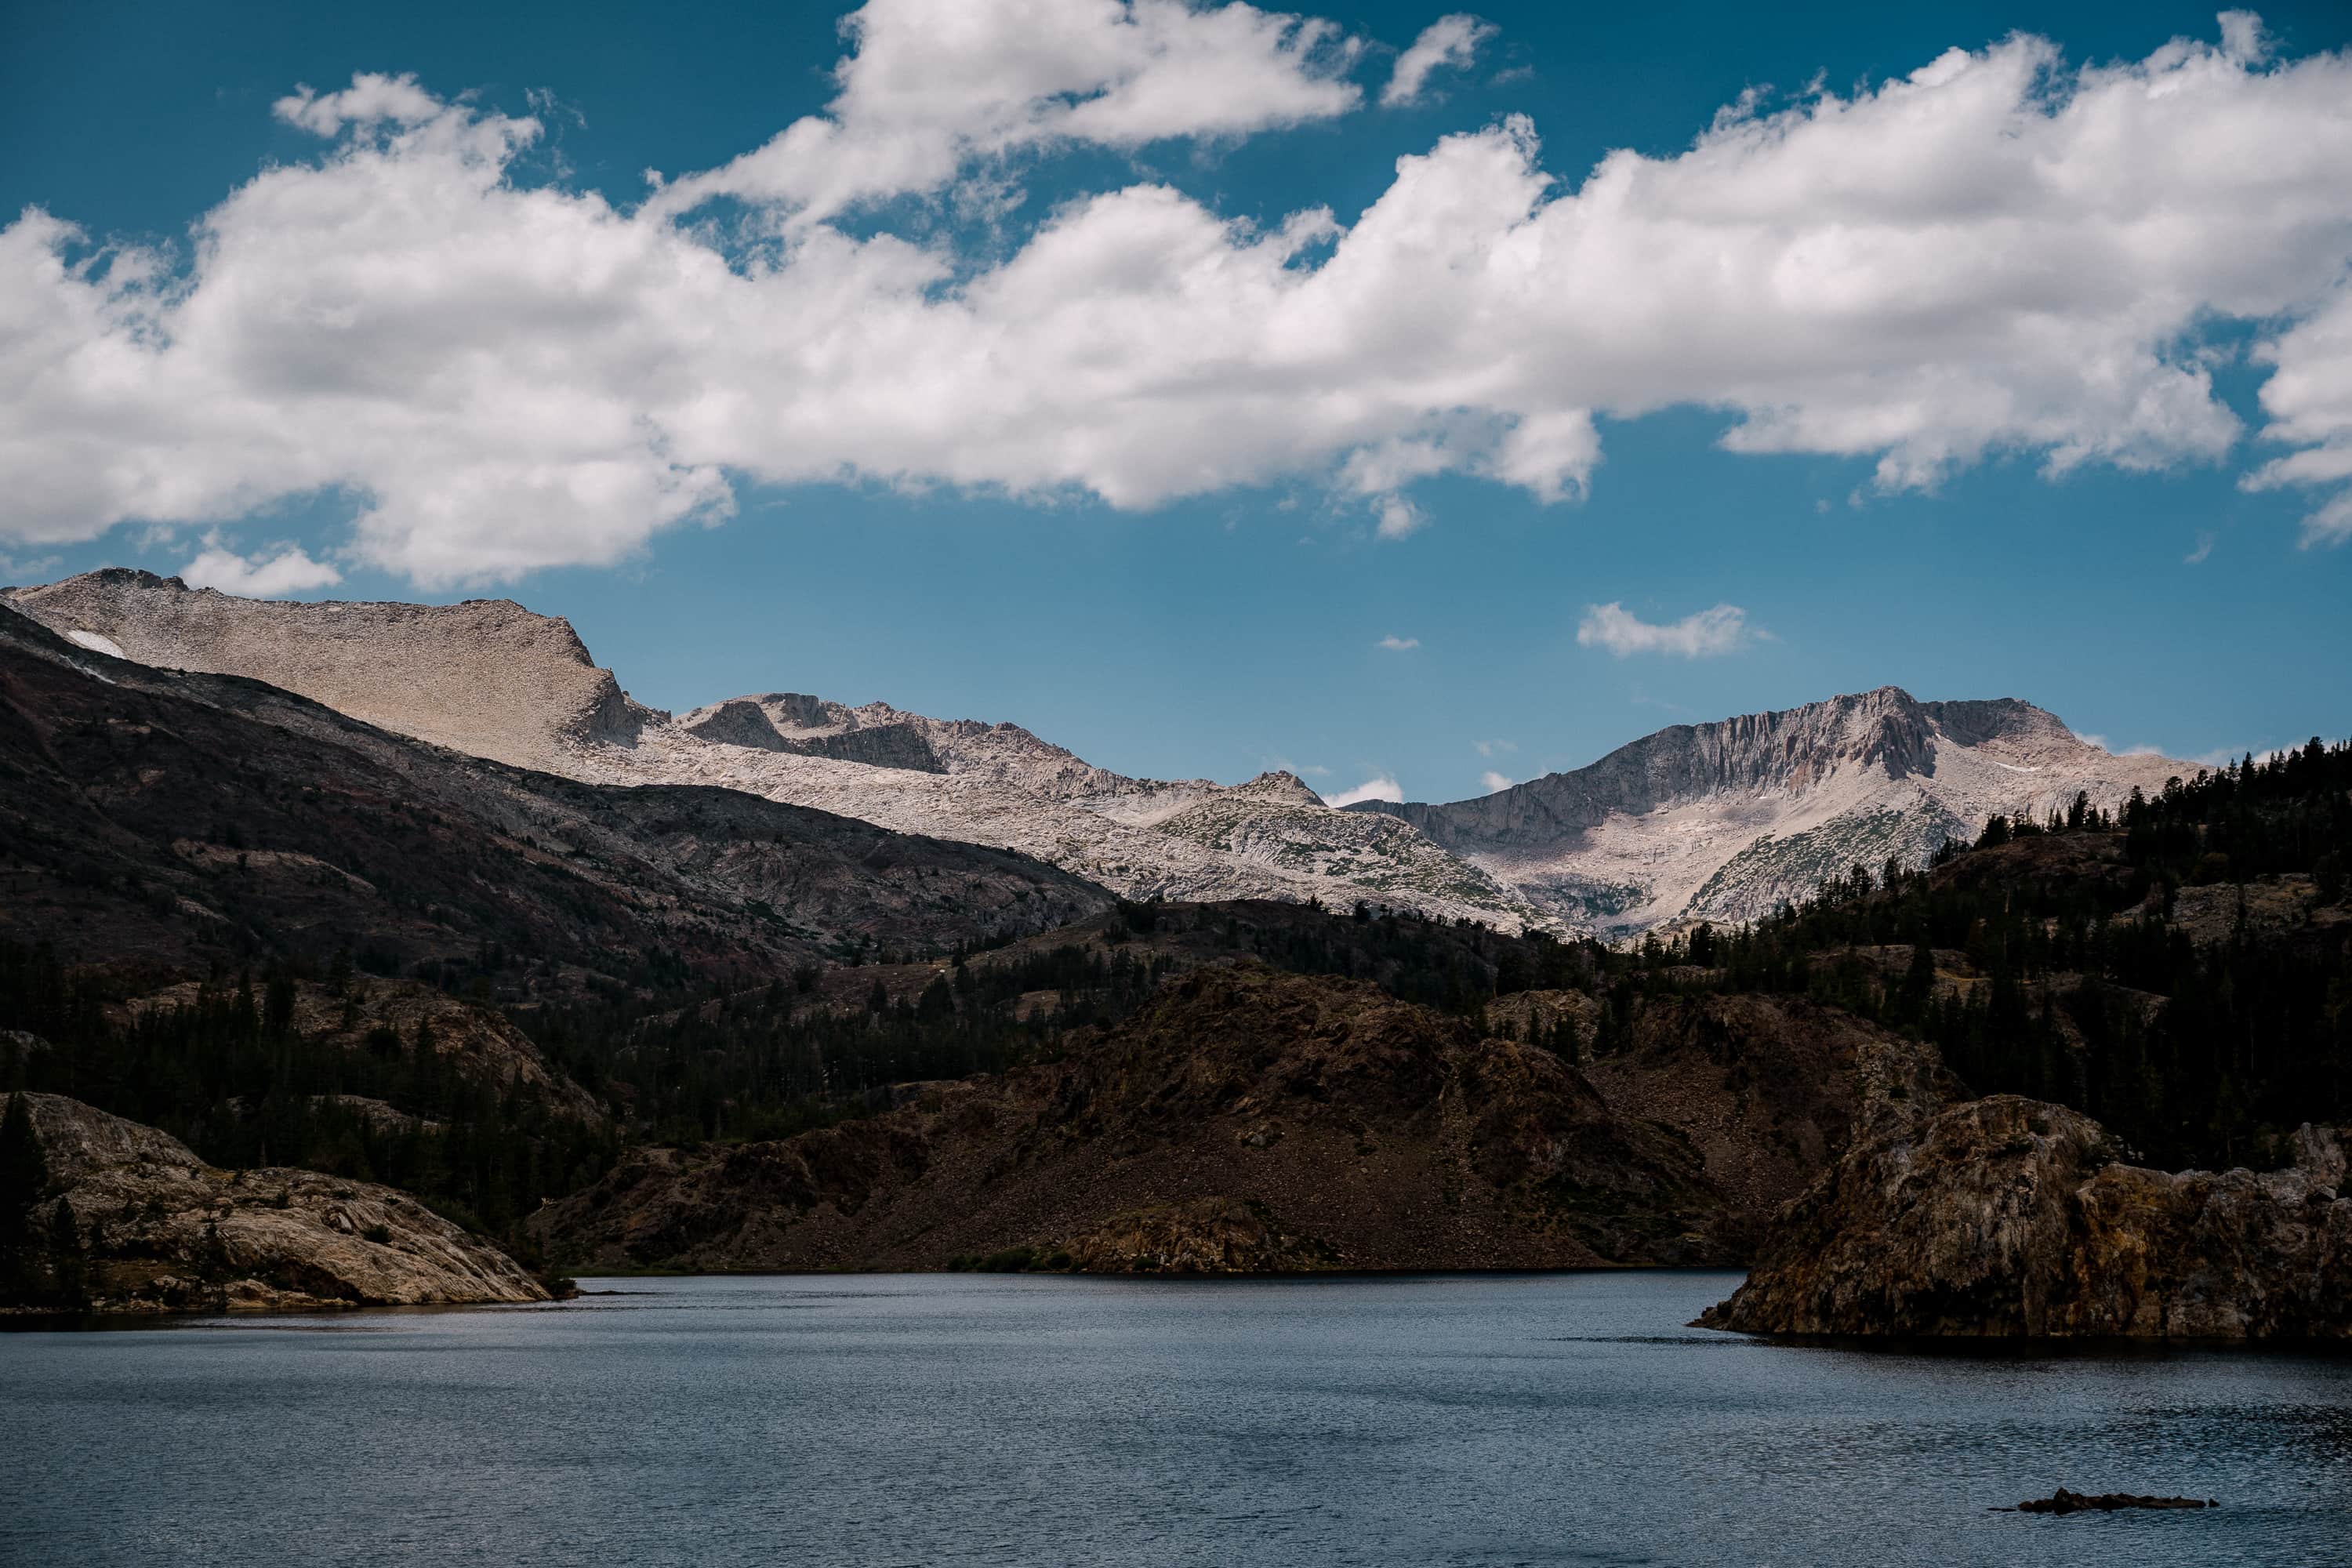 An alpine lake in the Sierras near with mountains in the background.